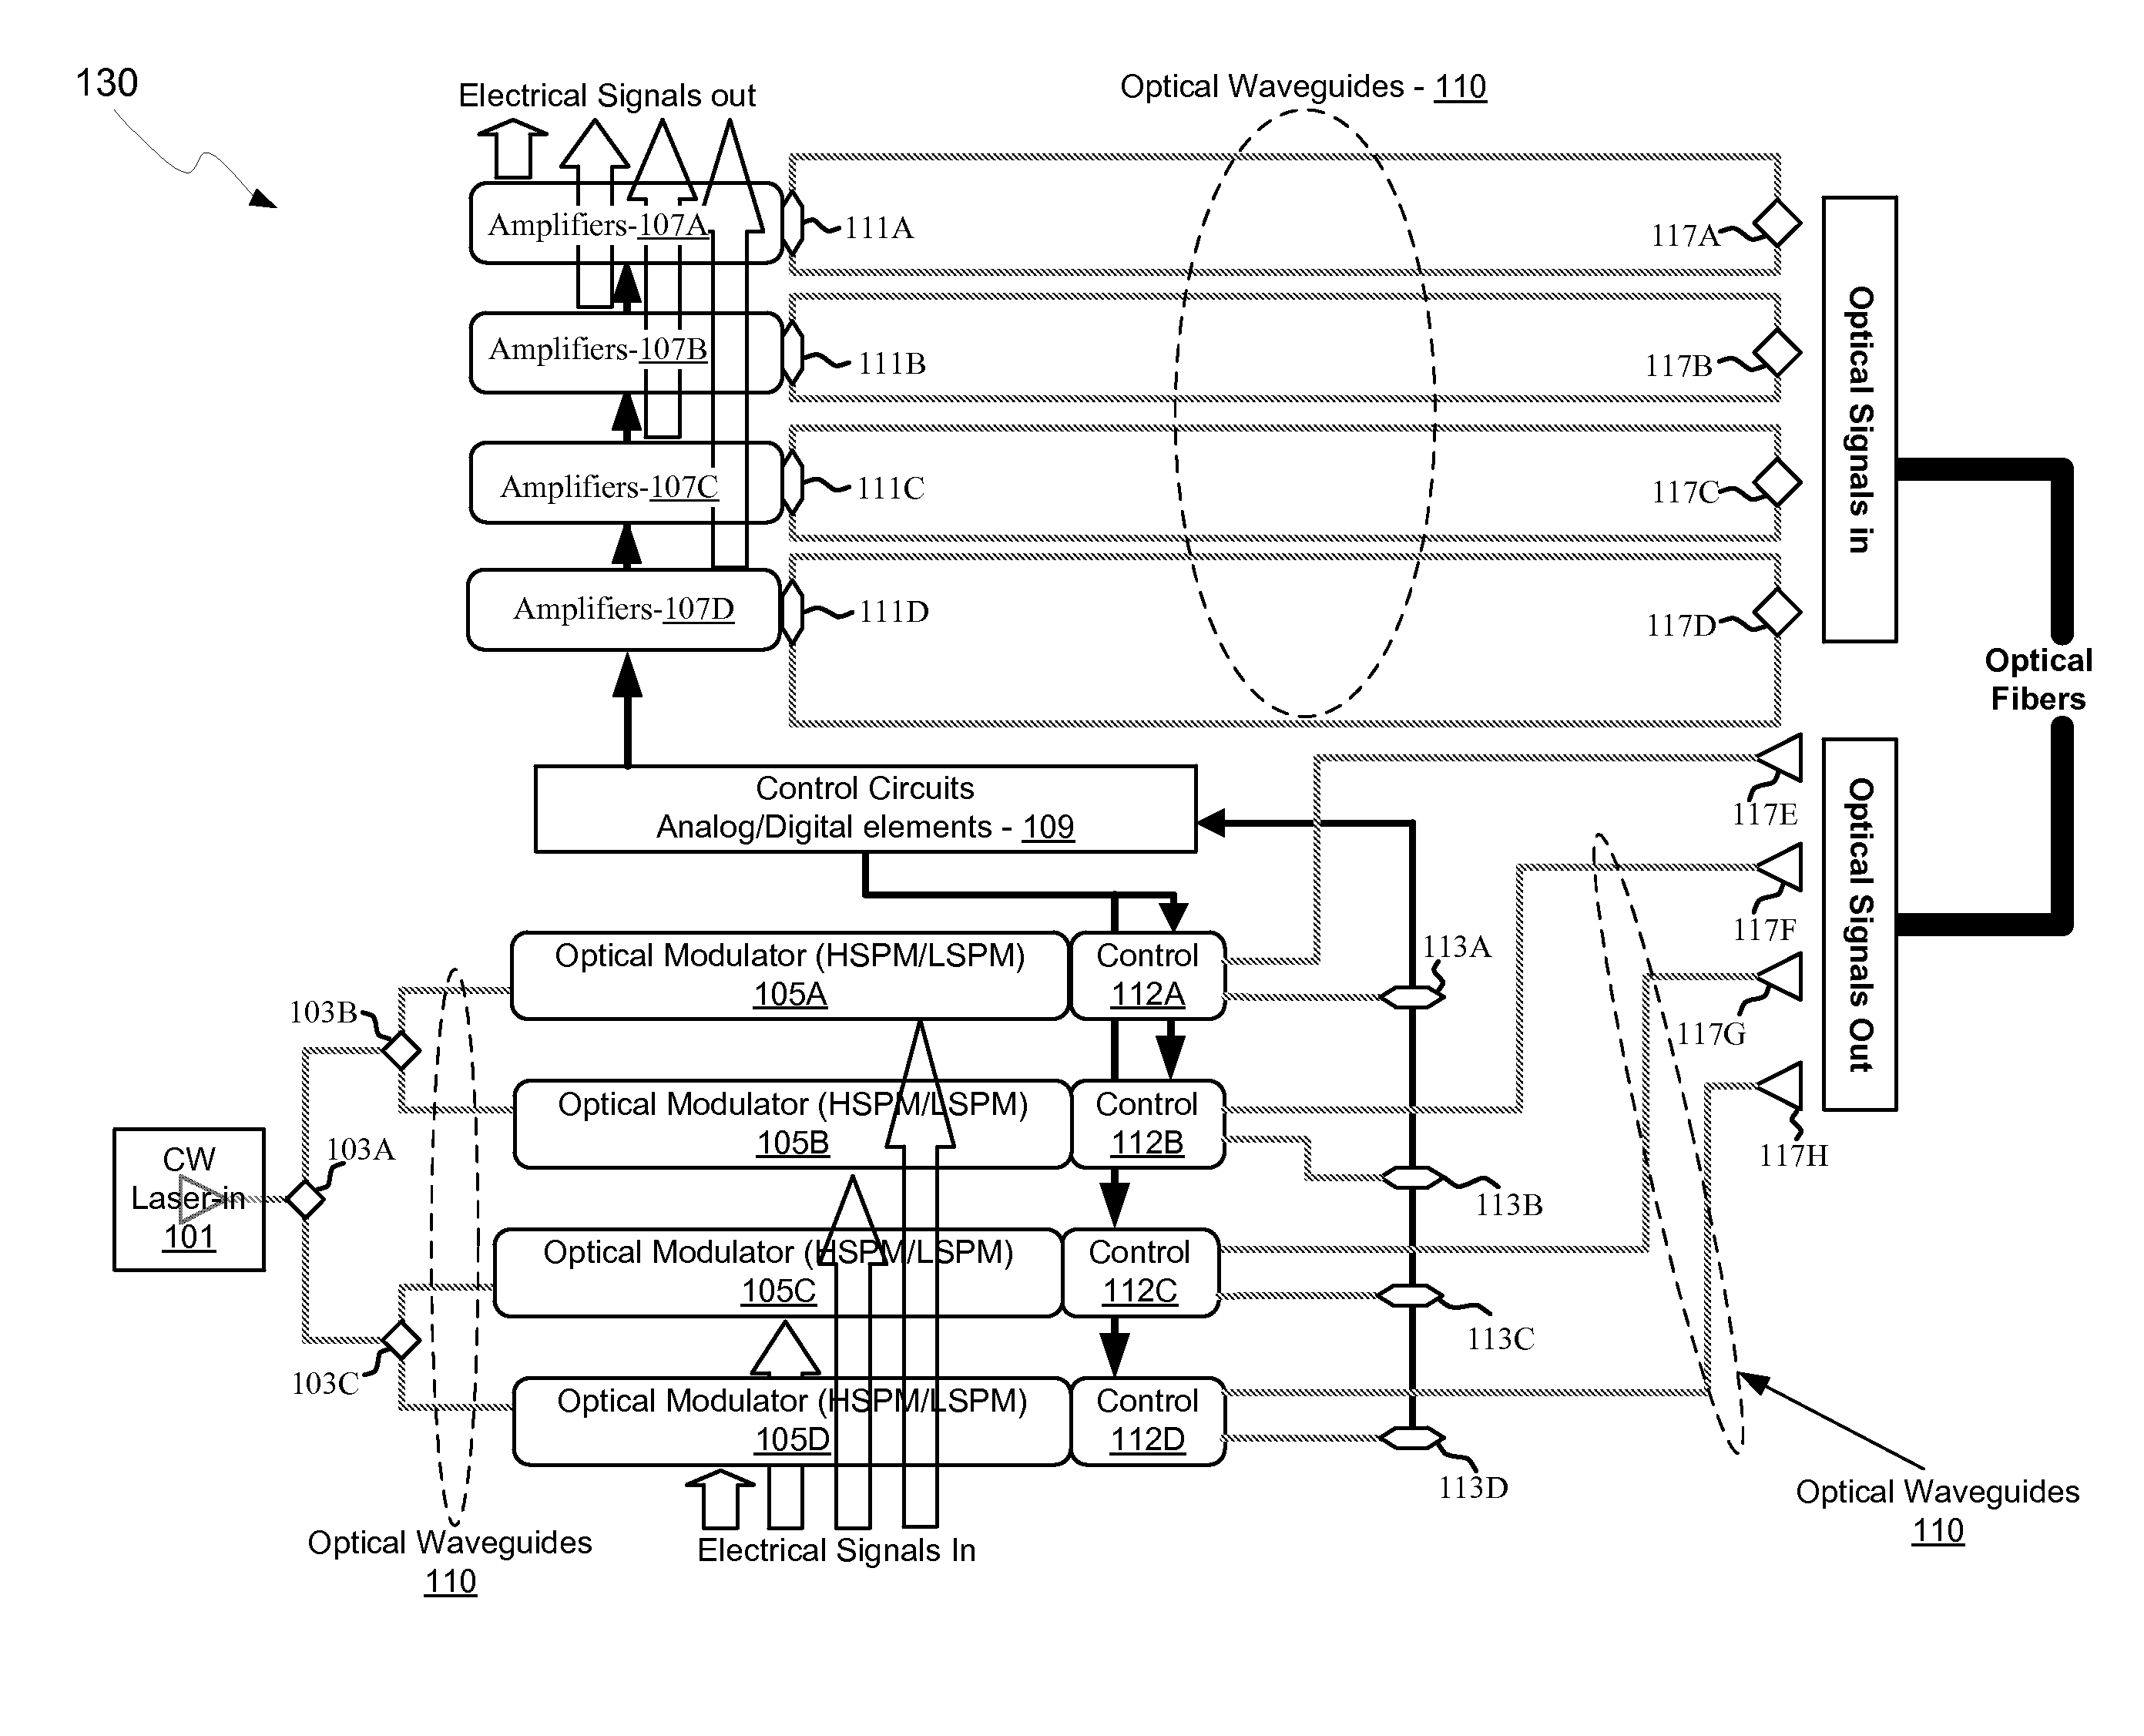 Method and system for an optoelectronic built-in self-test system for silicon photonics optical transceivers